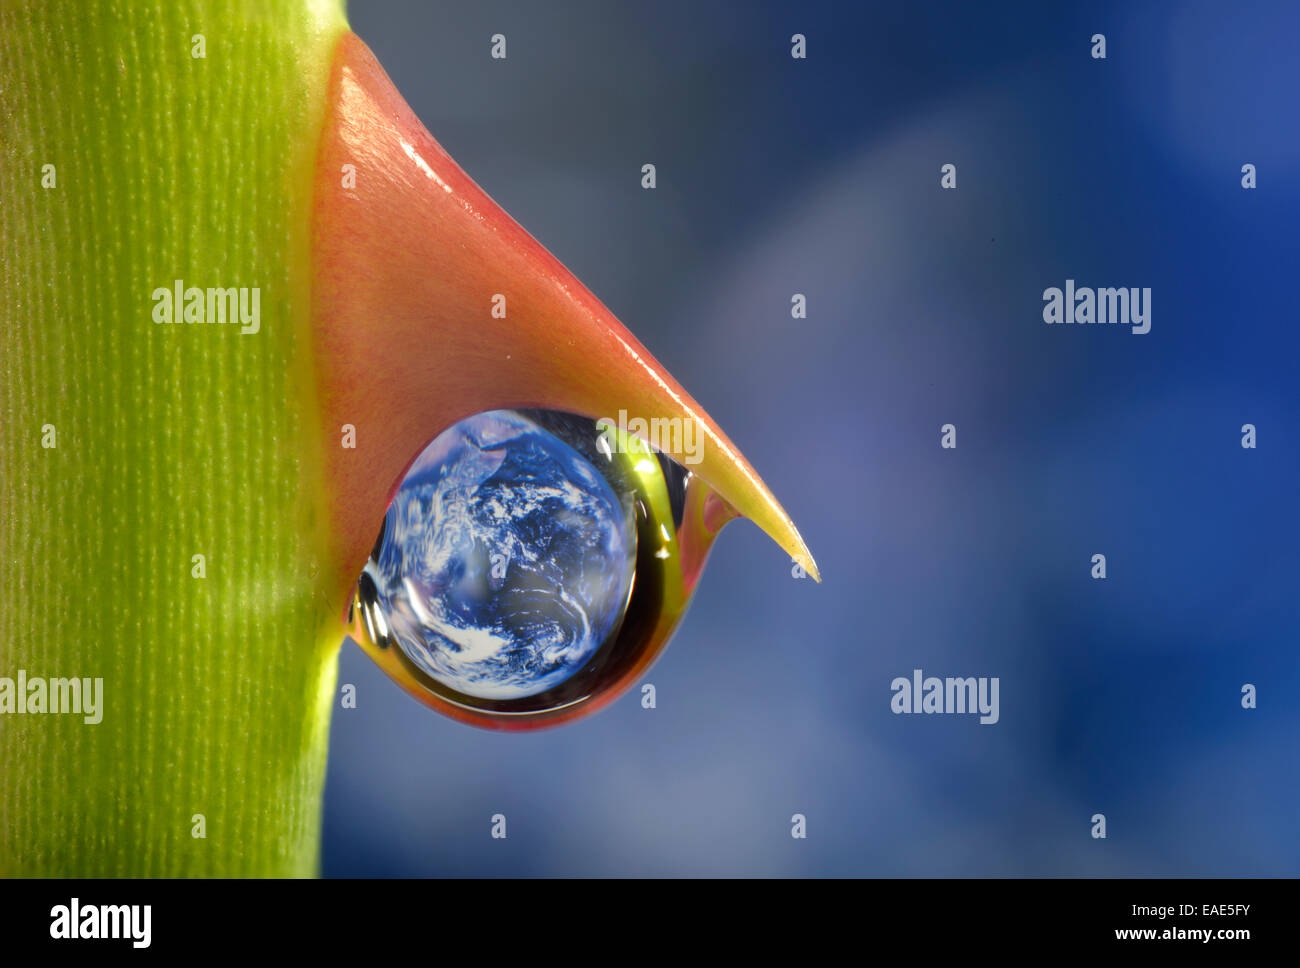 Planet Earth reflected in a dewdrop on a rose thorn, symbolic image of water as an elixir of life, Germany Stock Photo